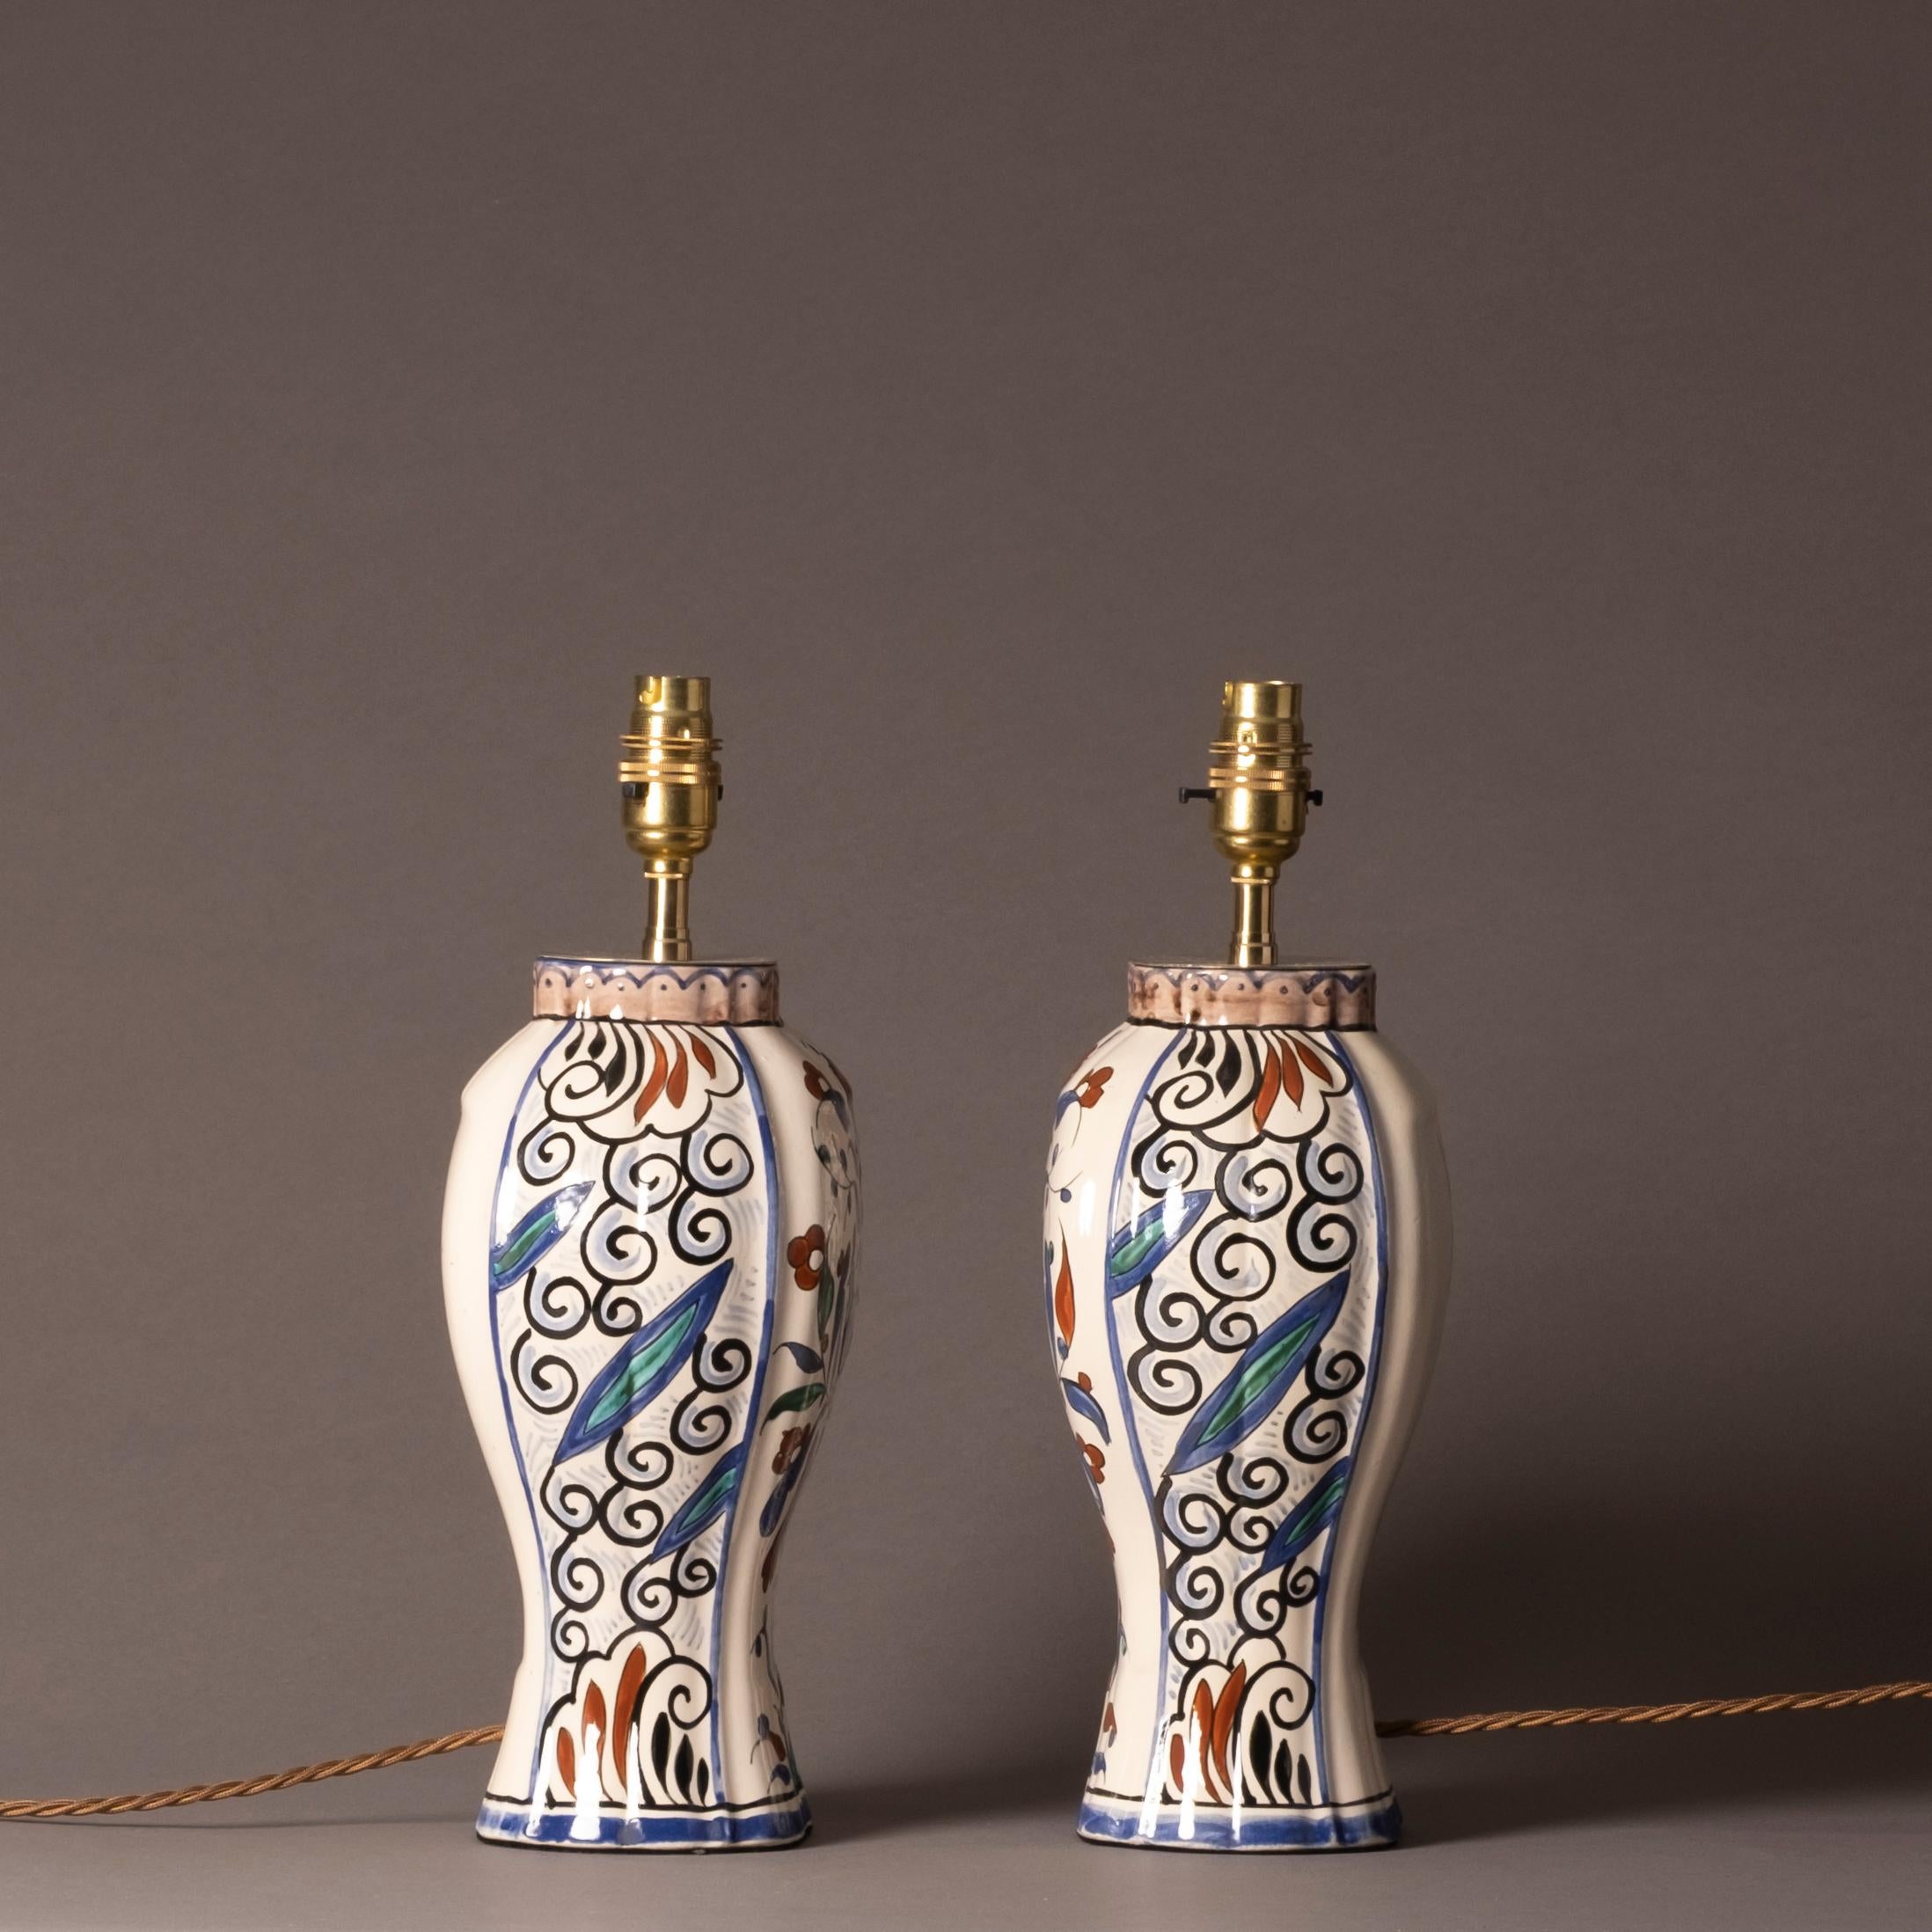 Fired Pair of Early 20th Century Faience Vase Lamps